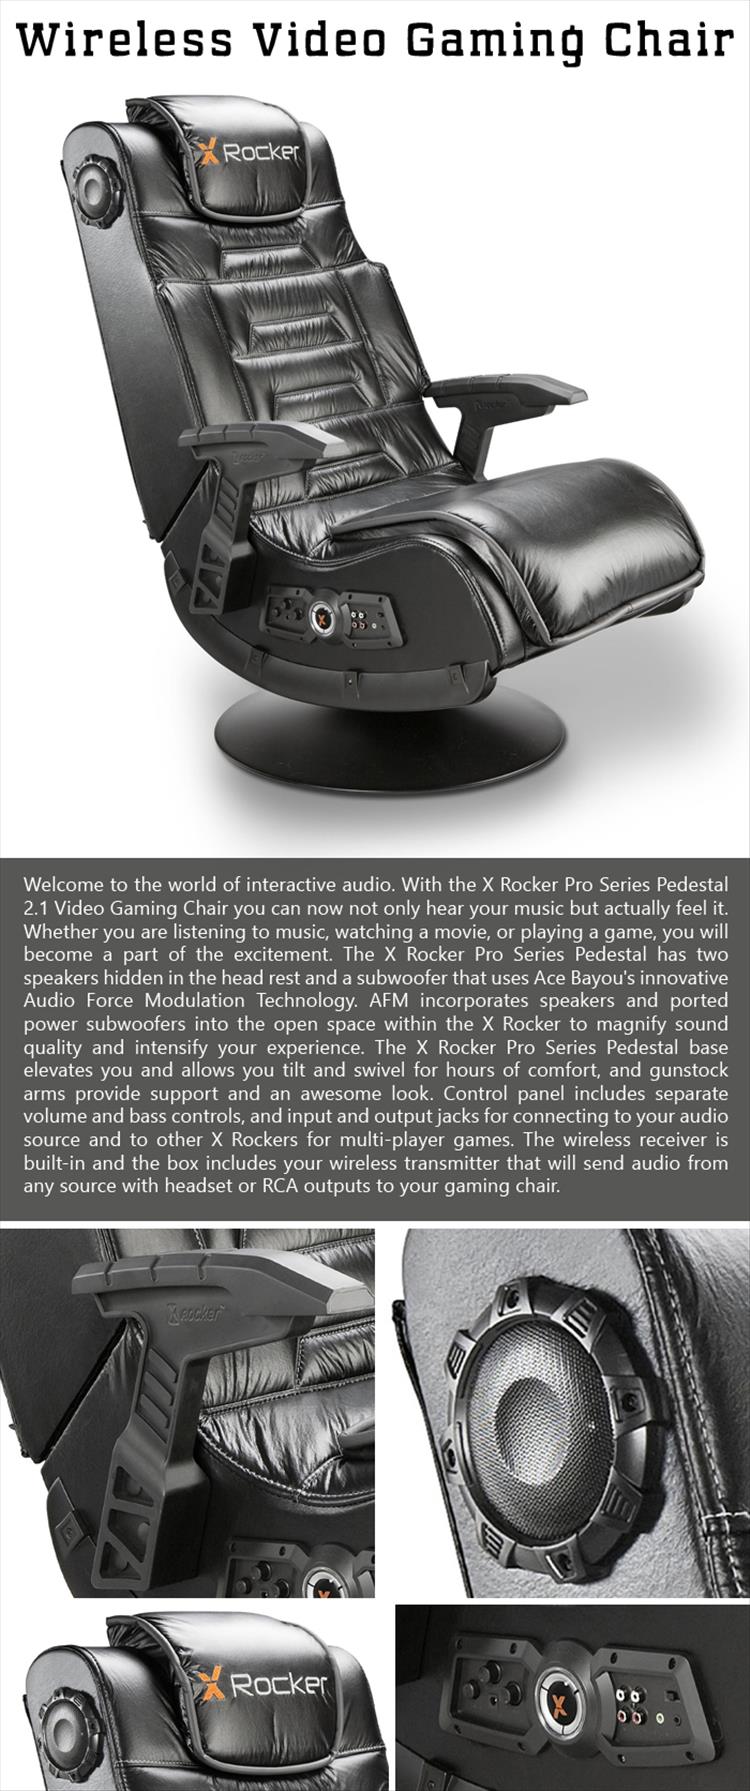 Wireless Video Gaming Chair